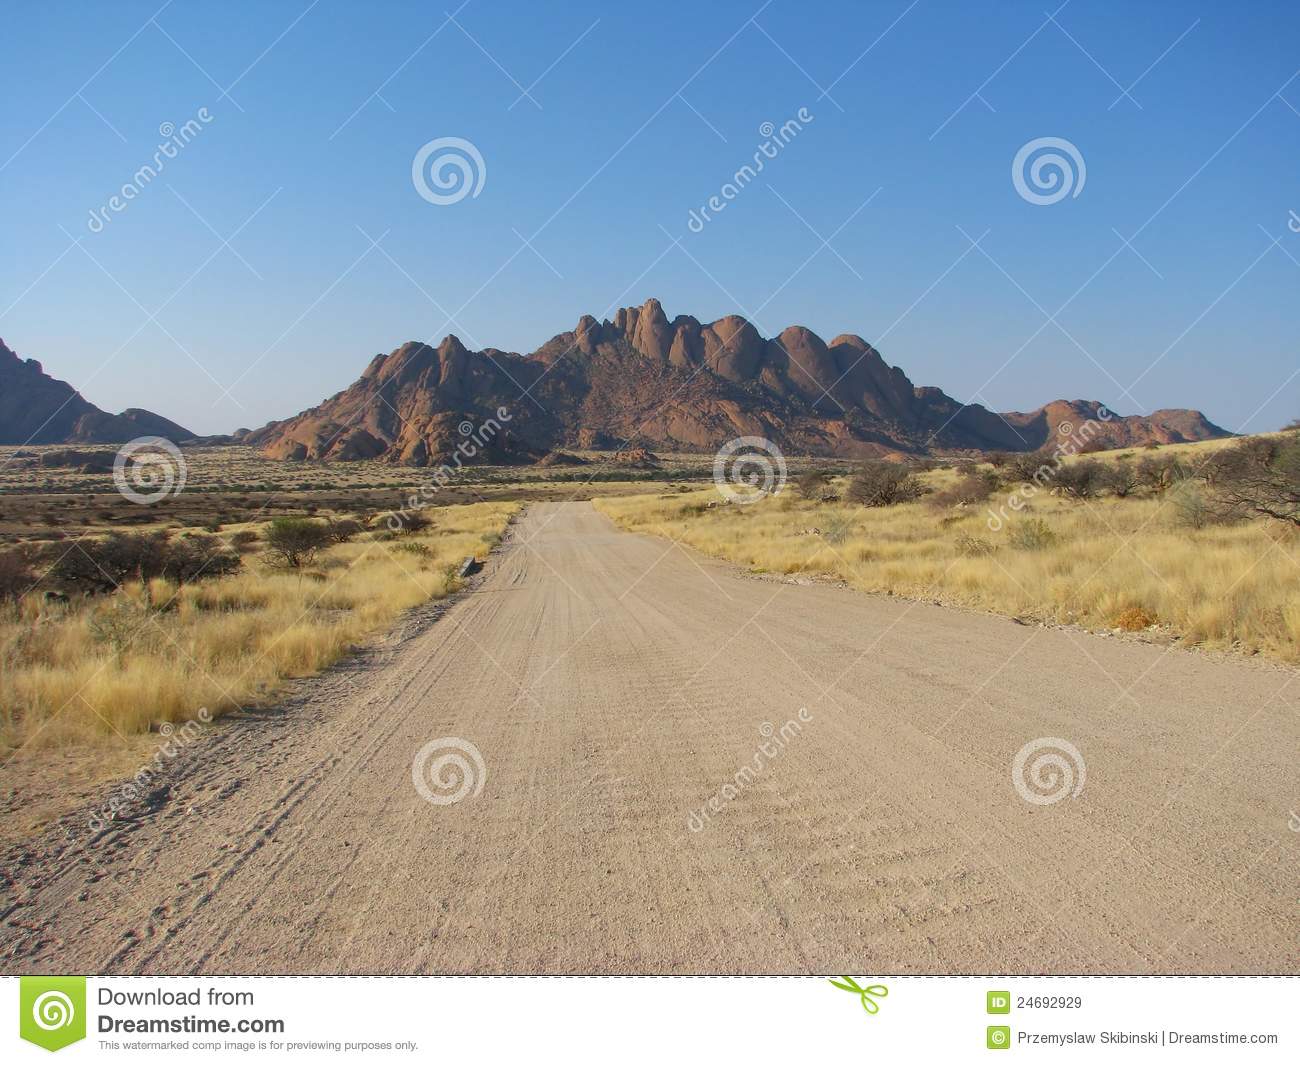 Namibian Gravel Road With Mountains In Background Royalty Free Stock